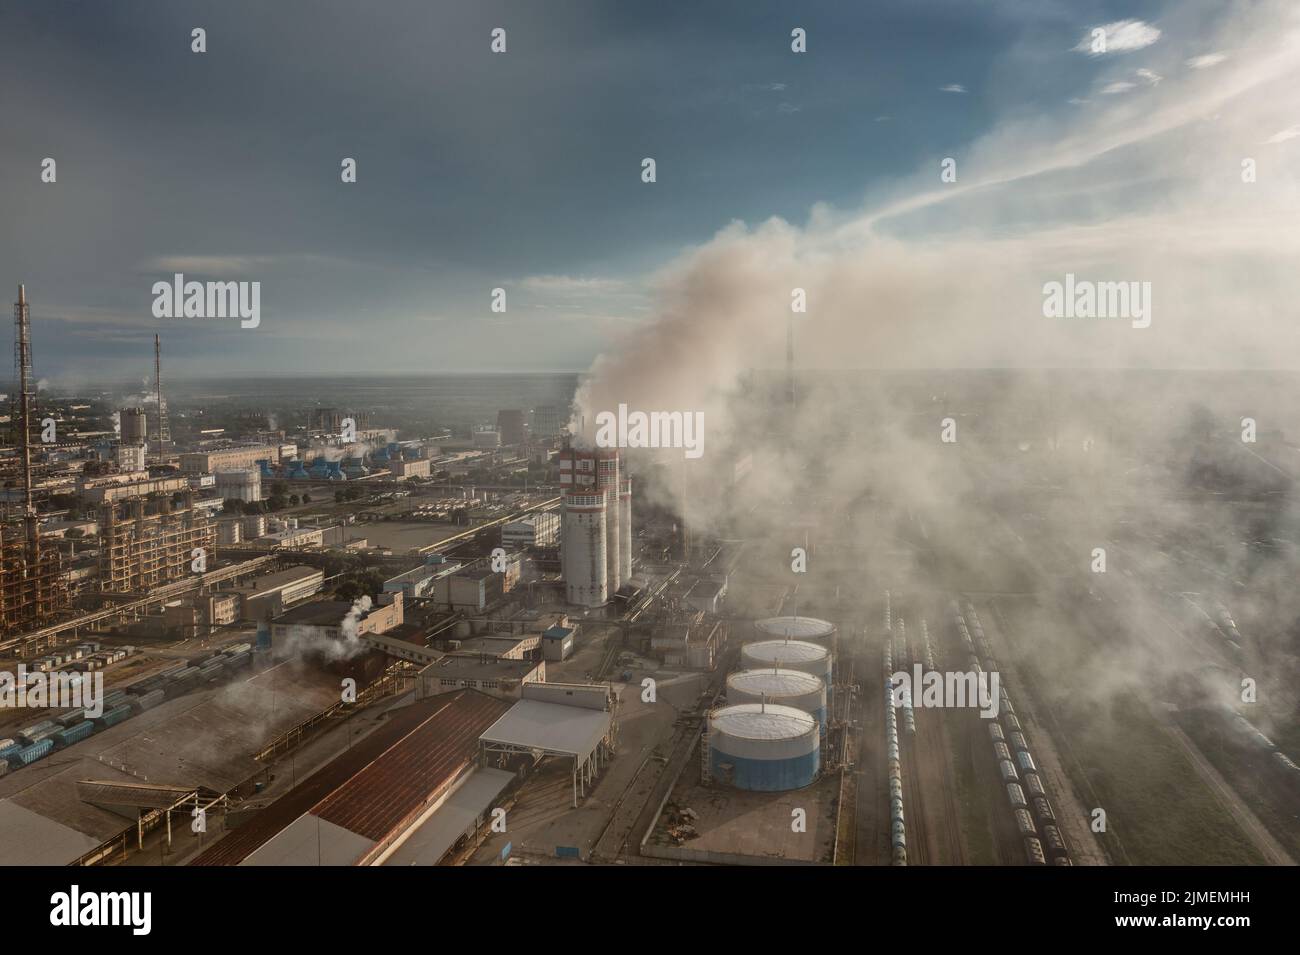 Oil and gas refinery plant in smoke Stock Photo